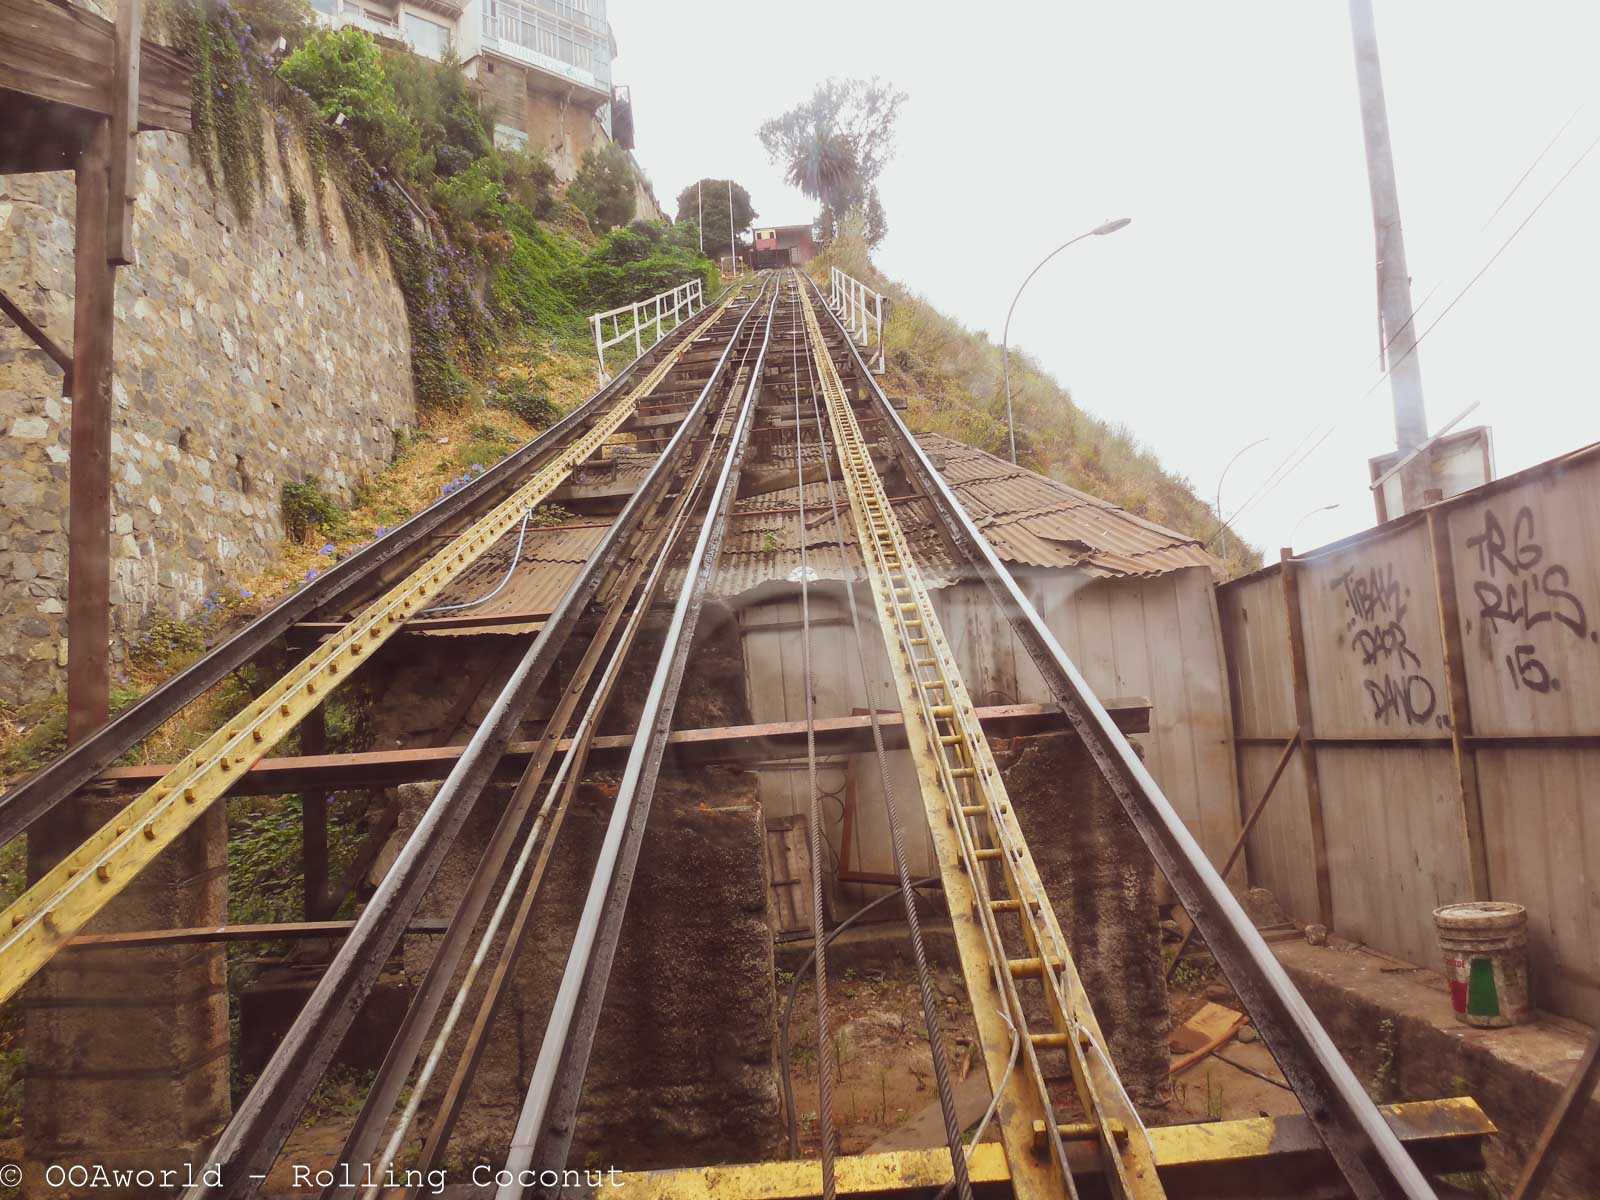 Ascensores Going Up Valparaiso Chile - Photo Ooaworld Rolling Coconut